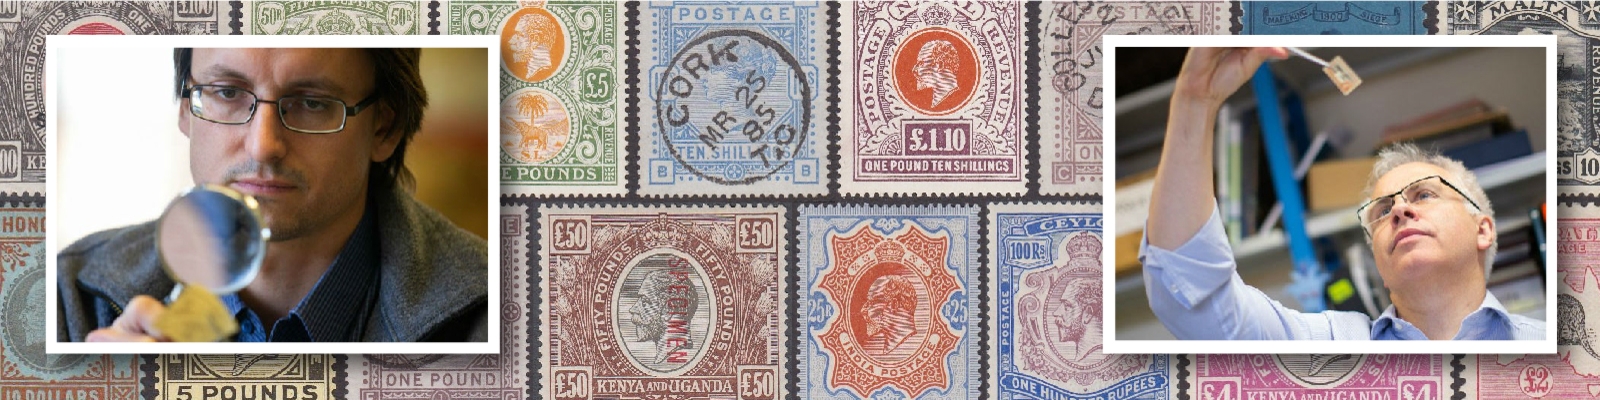 Stamp Valuations